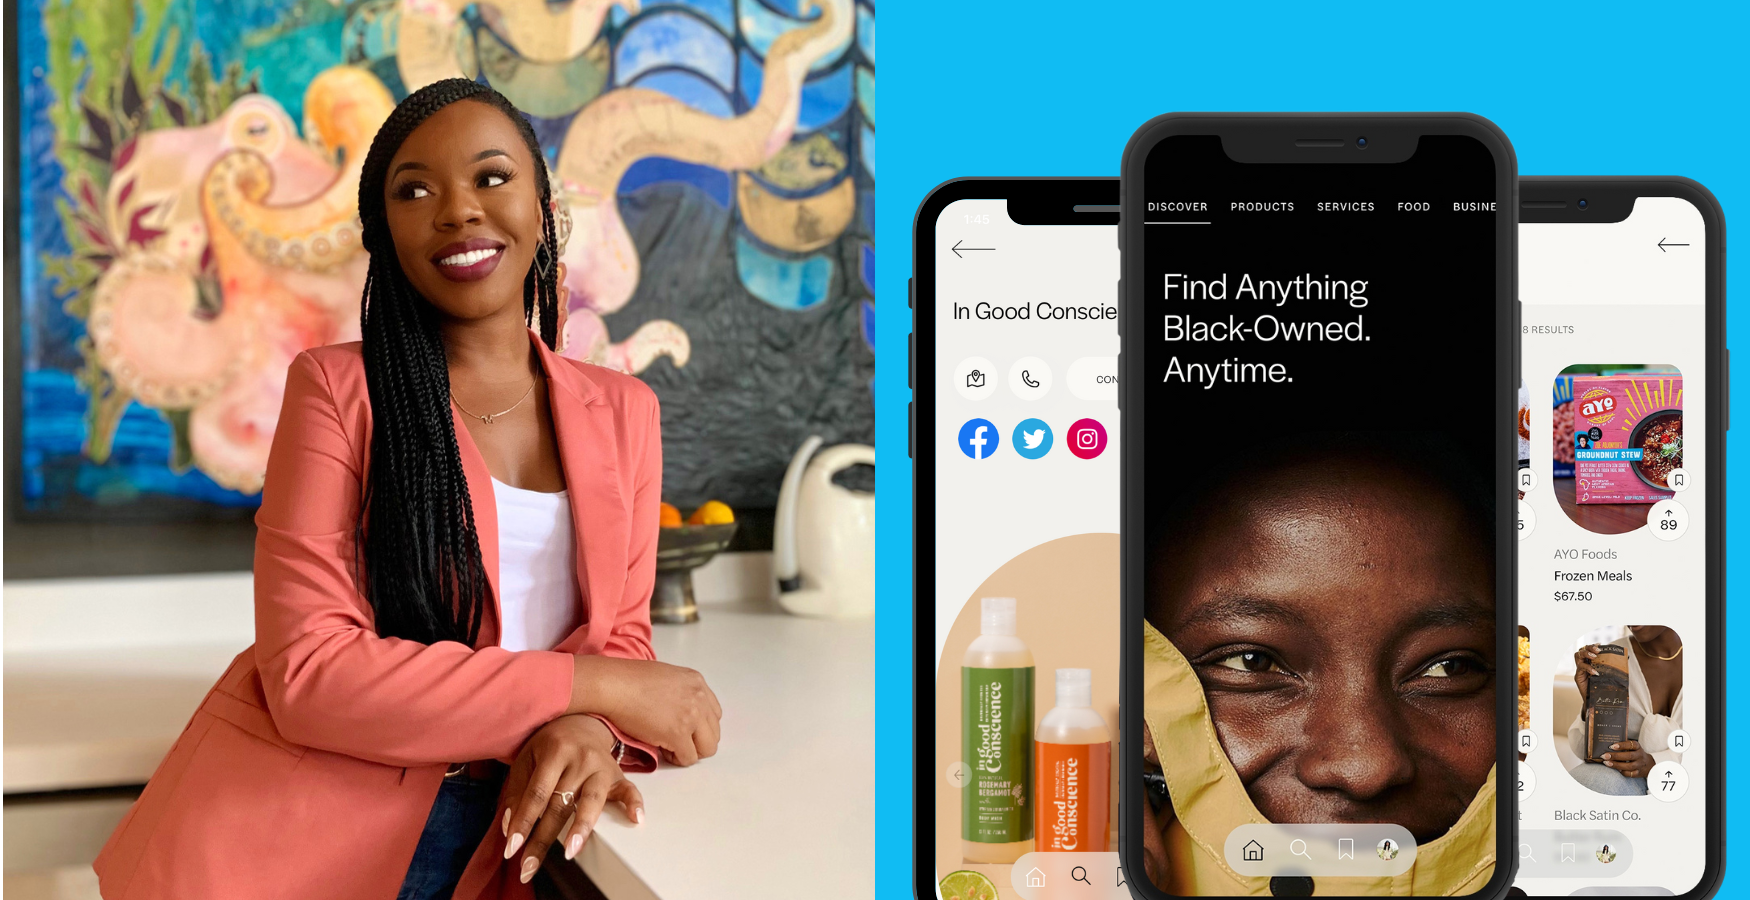 Founder of Largest Black-Owned Business Discovery App Honored By PayPal, Mastercard, and more